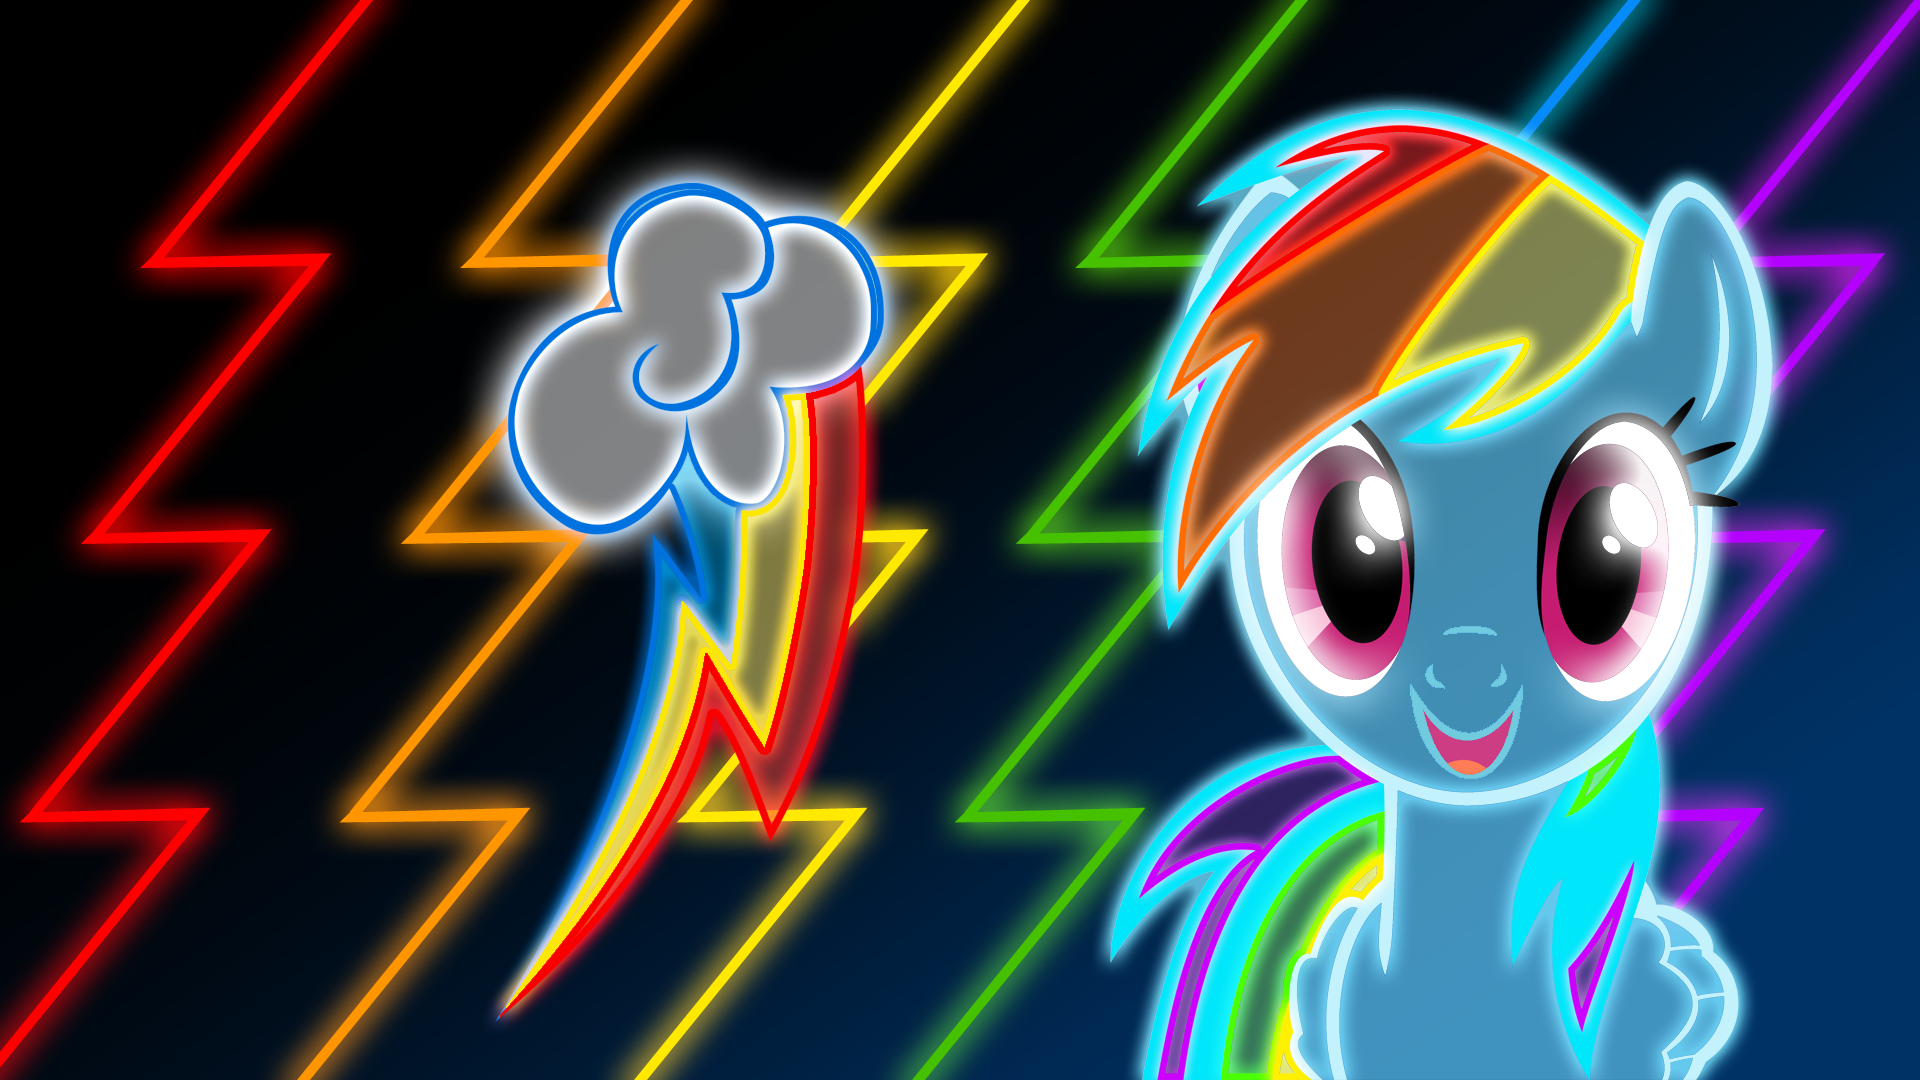 Rainbow Dash Wallpaper Image Amp Pictures Becuo